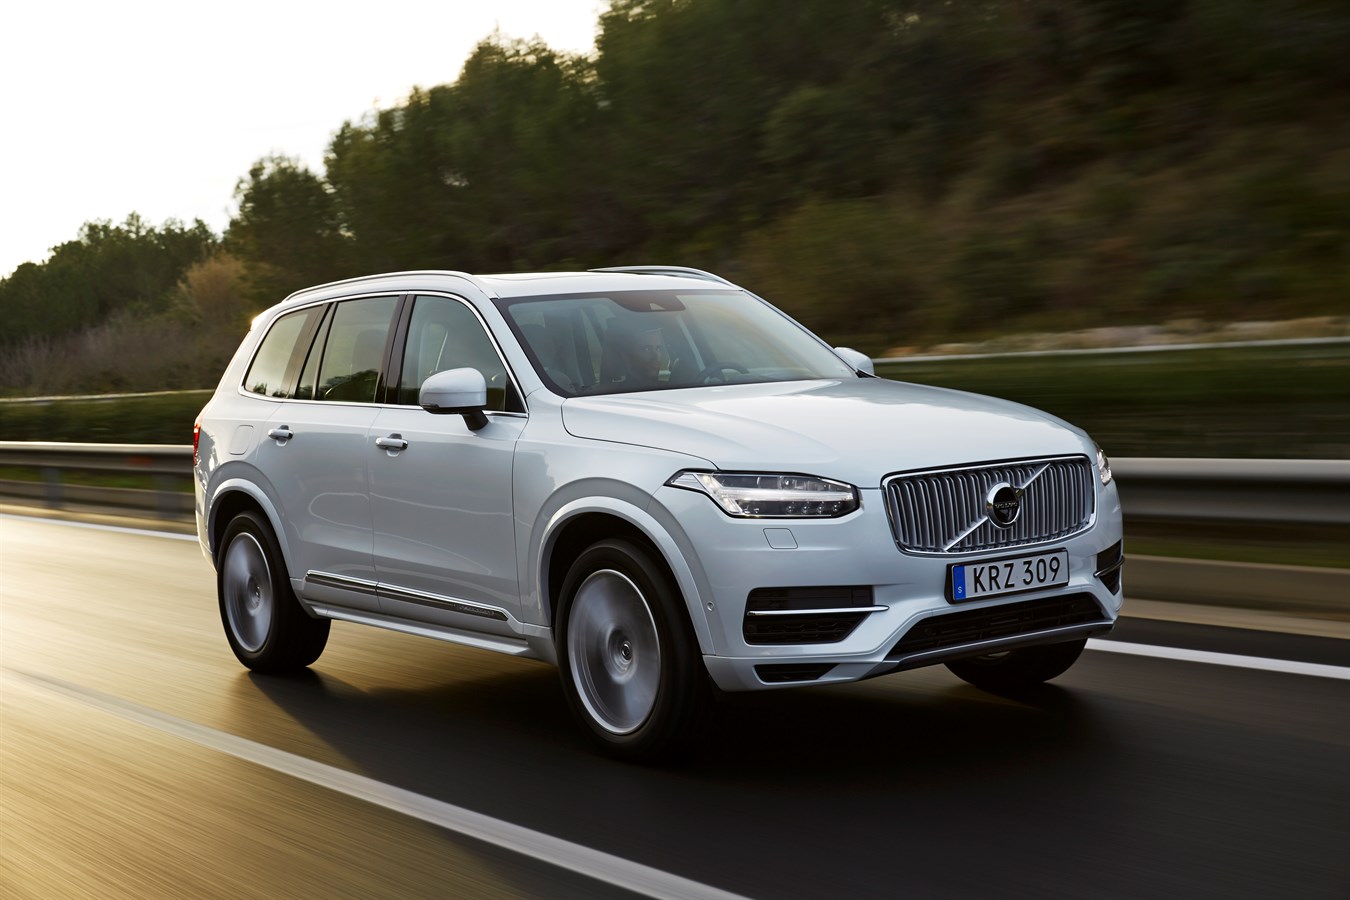 Record sales drive Volvo Car Group to a solid 2.2 billion SEK profit in 2014  - Volvo Cars Global Media Newsroom